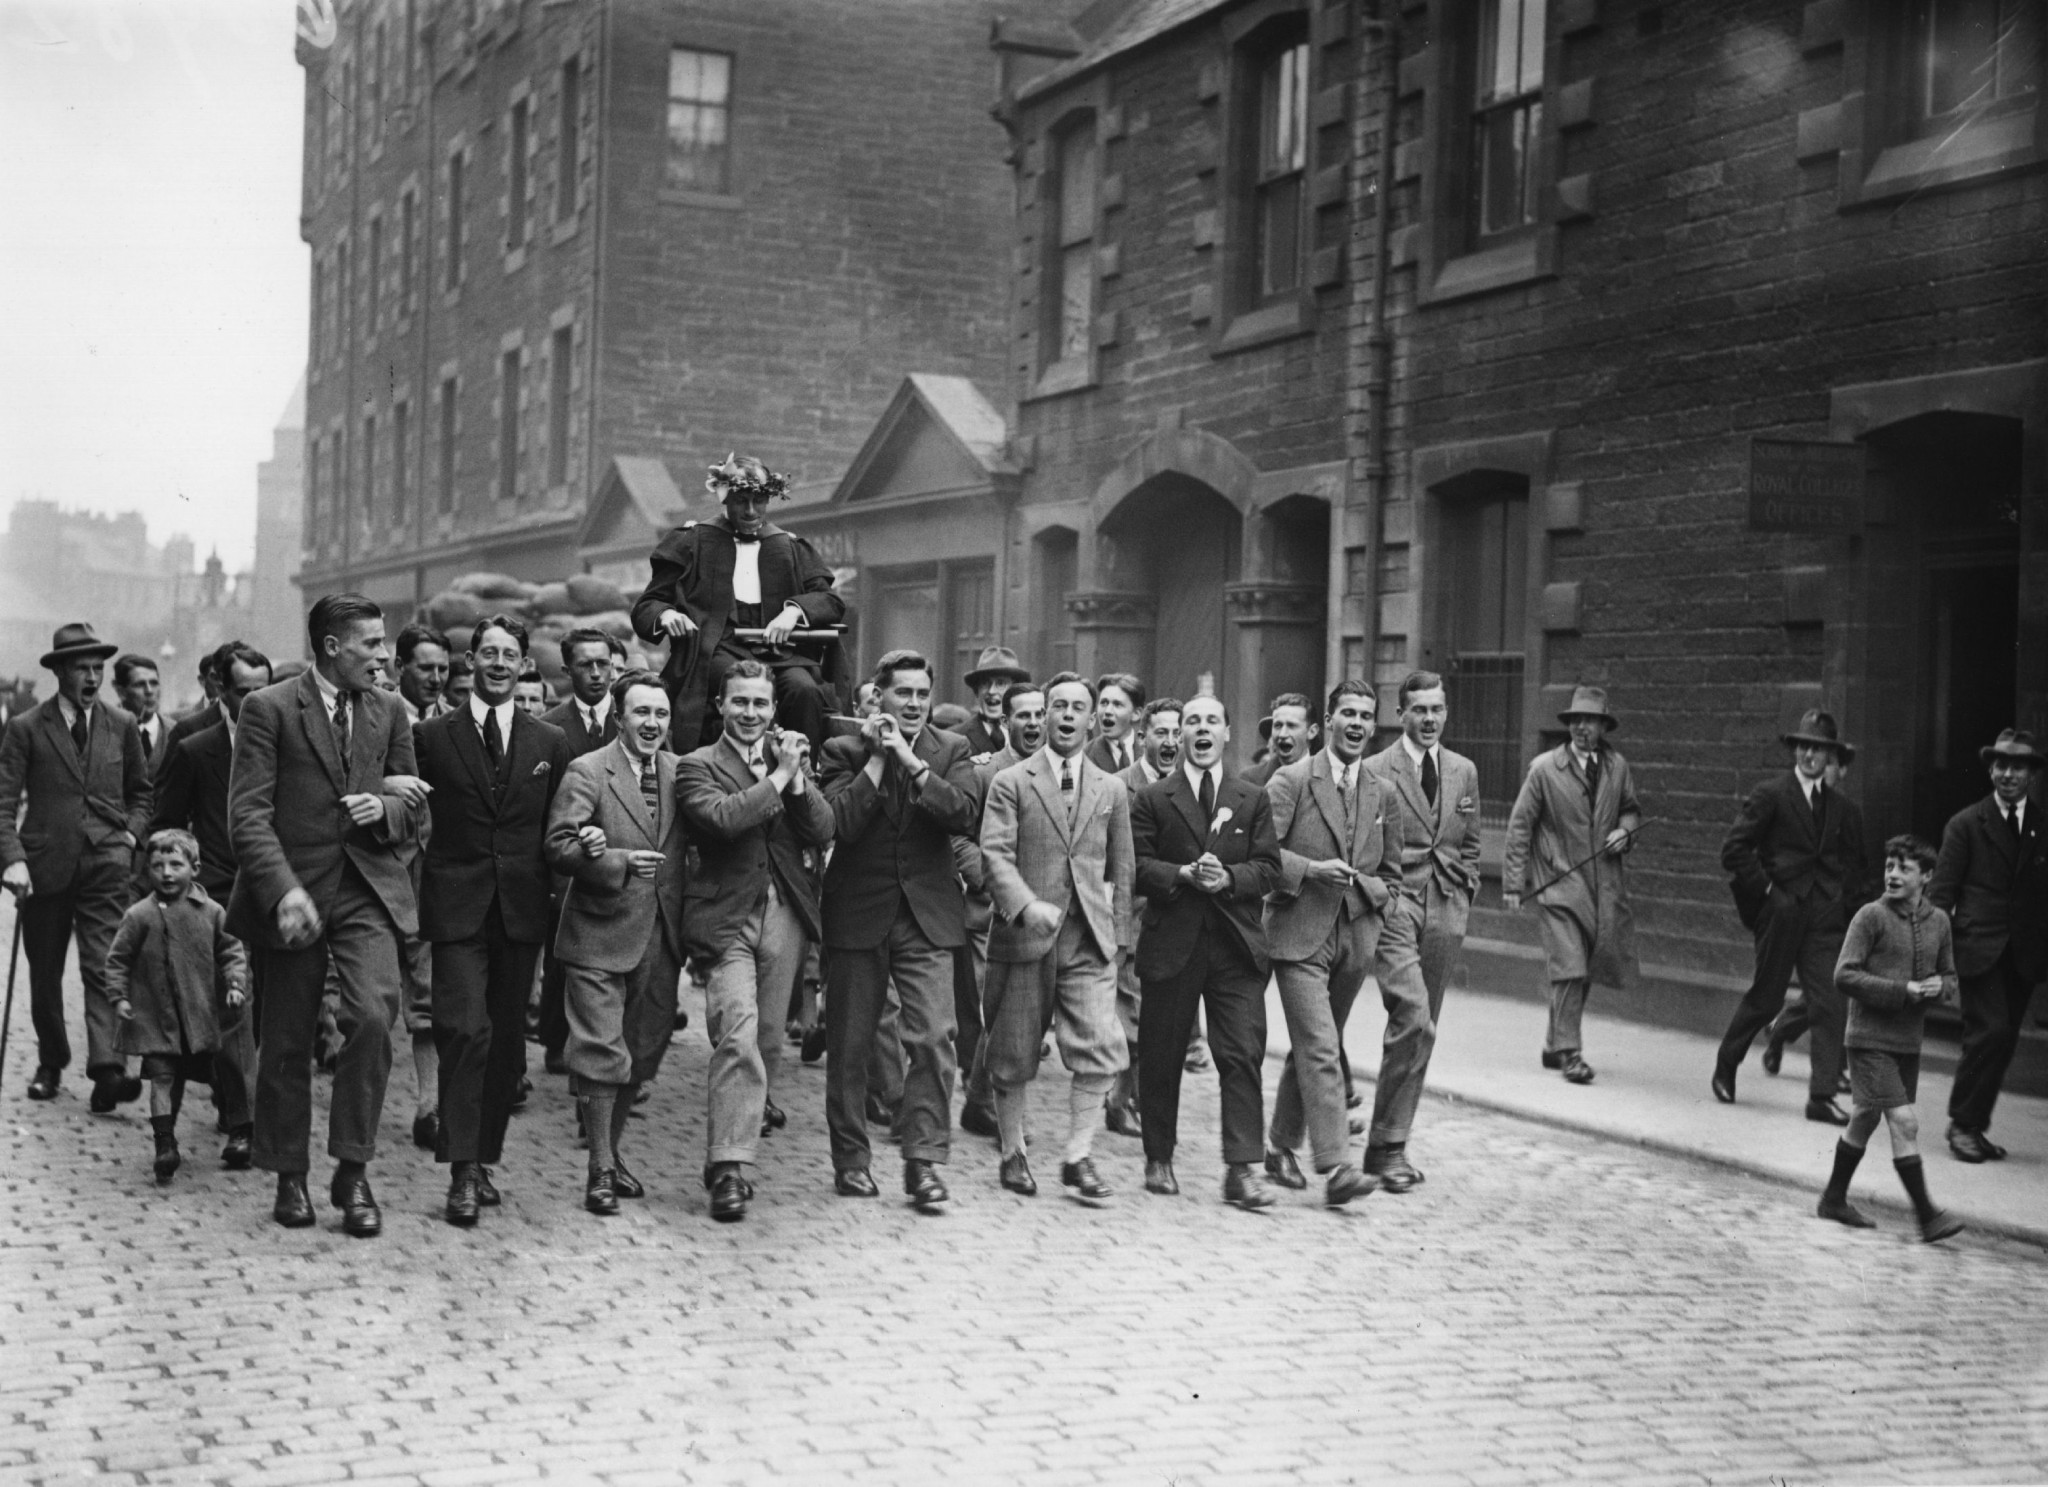 In 1924, Eric Liddell was chaired by students of Edinburgh university after his gold medal success ©Getty Images